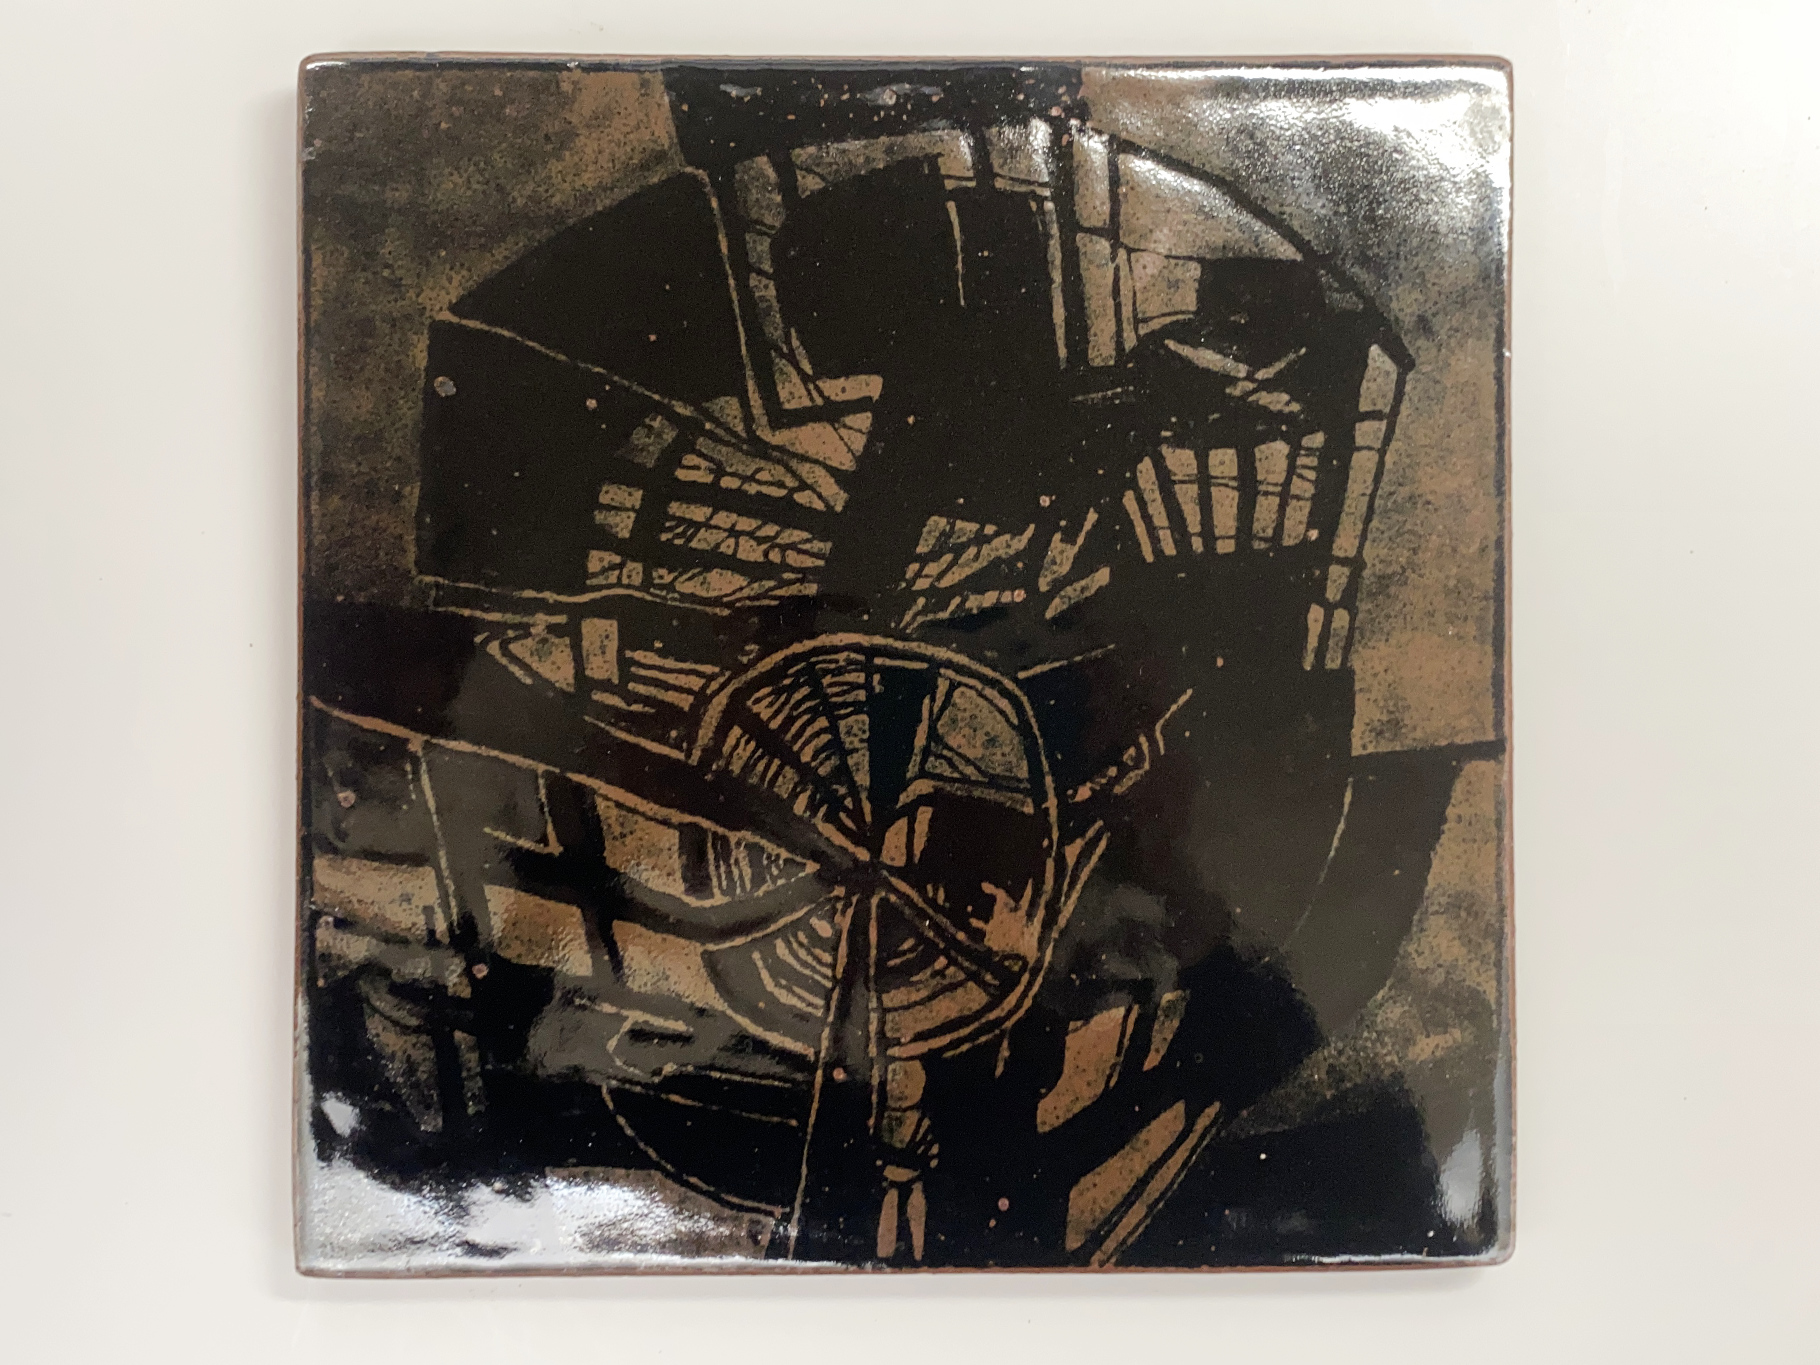 Wall-Plate, Ceramic, Stoneware, Unique Piece, abstract Painting with Wax on black Glaze, matte black Glaze on top, by Wilhelm & Elly Kuch, 2006